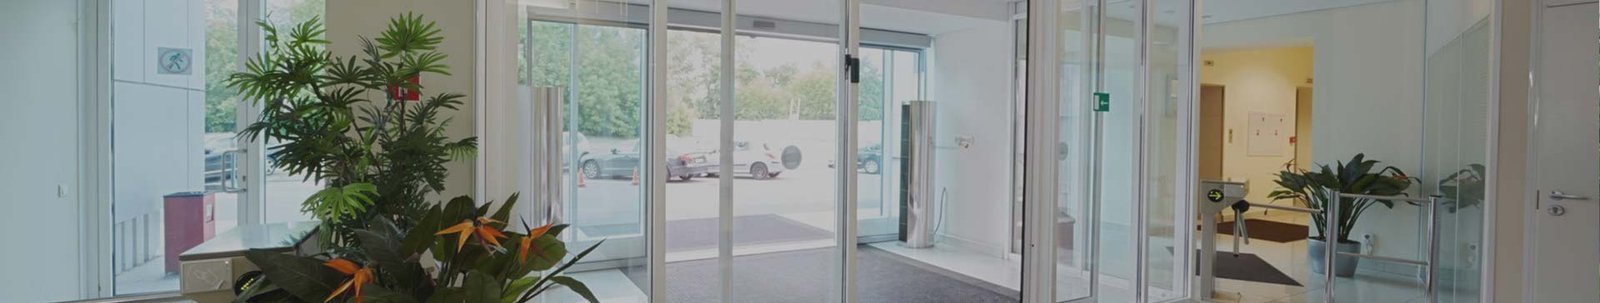 commercial-automatic-doors-banner-5